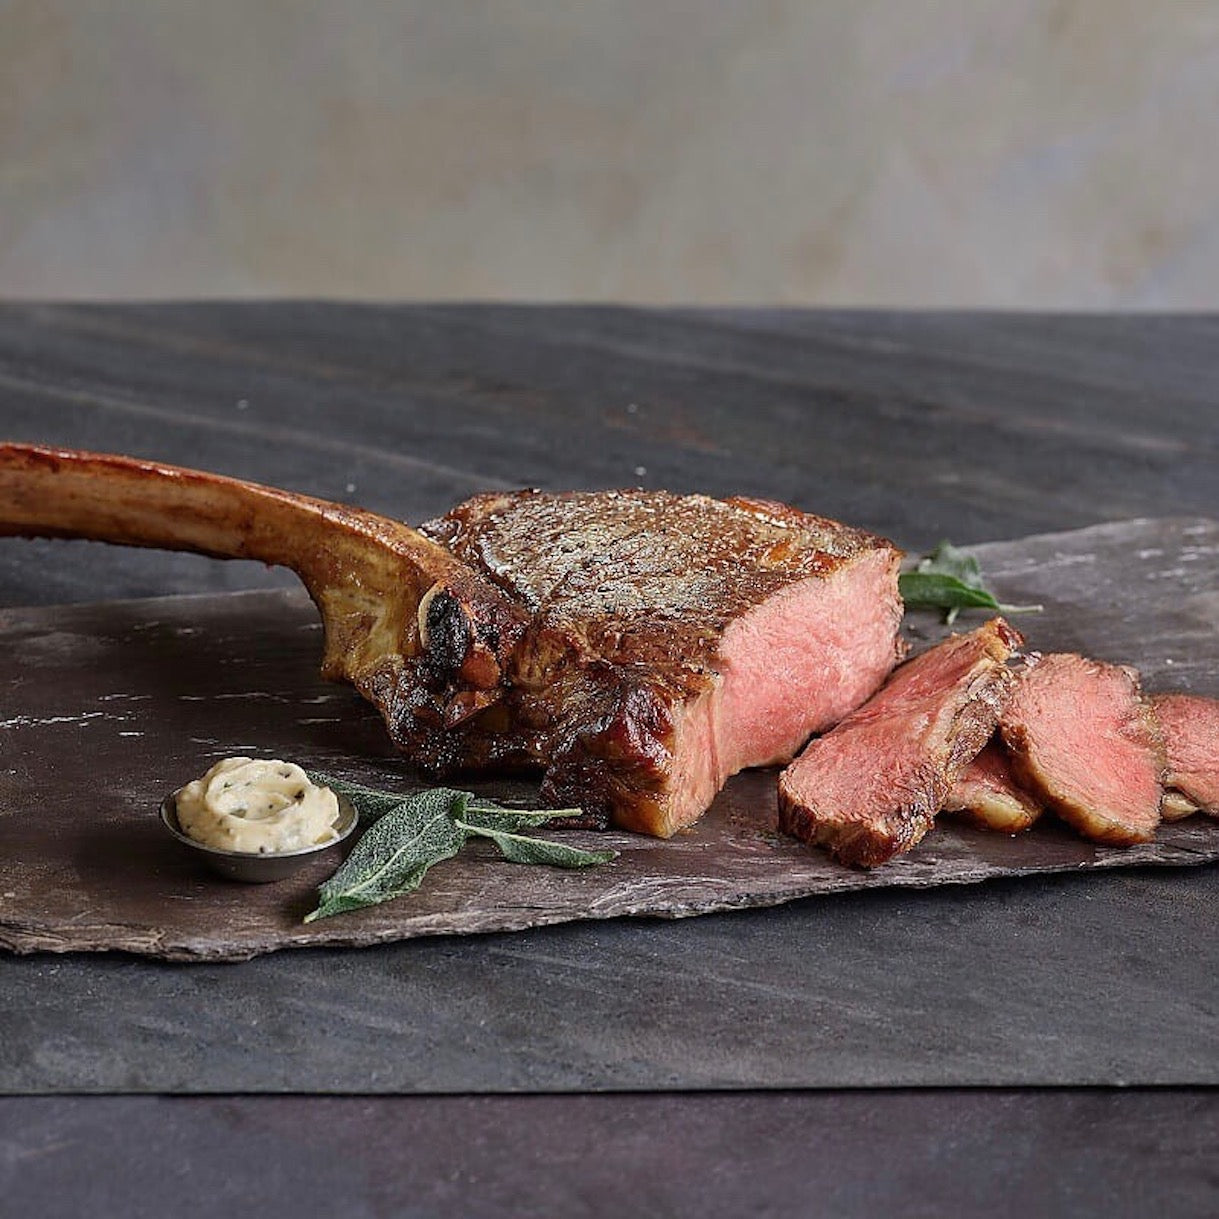 grain-fed-tomahawk-online-grocery-supermarket-delivery-singapore